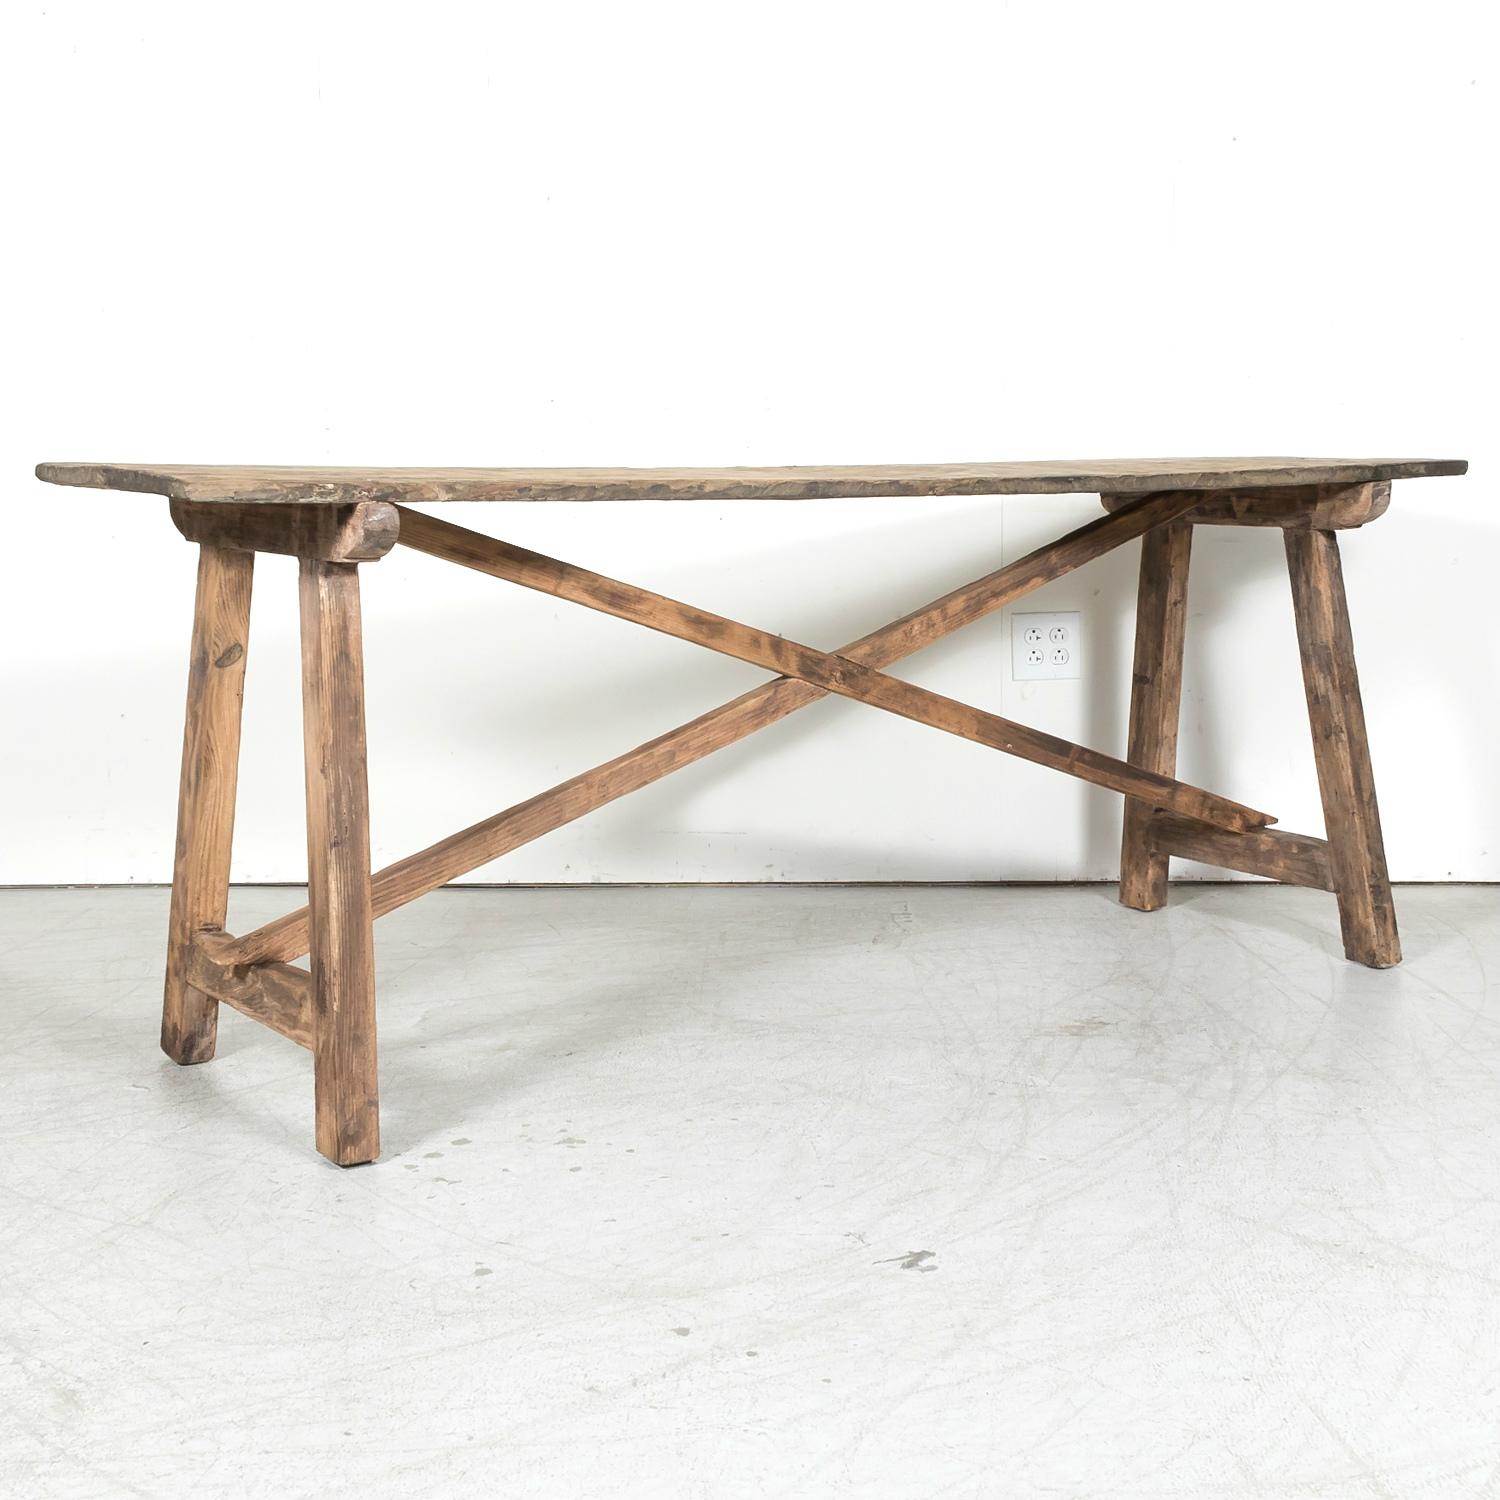 A handsome 19th century rustic Spanish console or side trestle table handcrafted of solid oak and pine in the Catalan region, circa 1890s. Having a solid oak top resting on a pine trestle base joined by an 